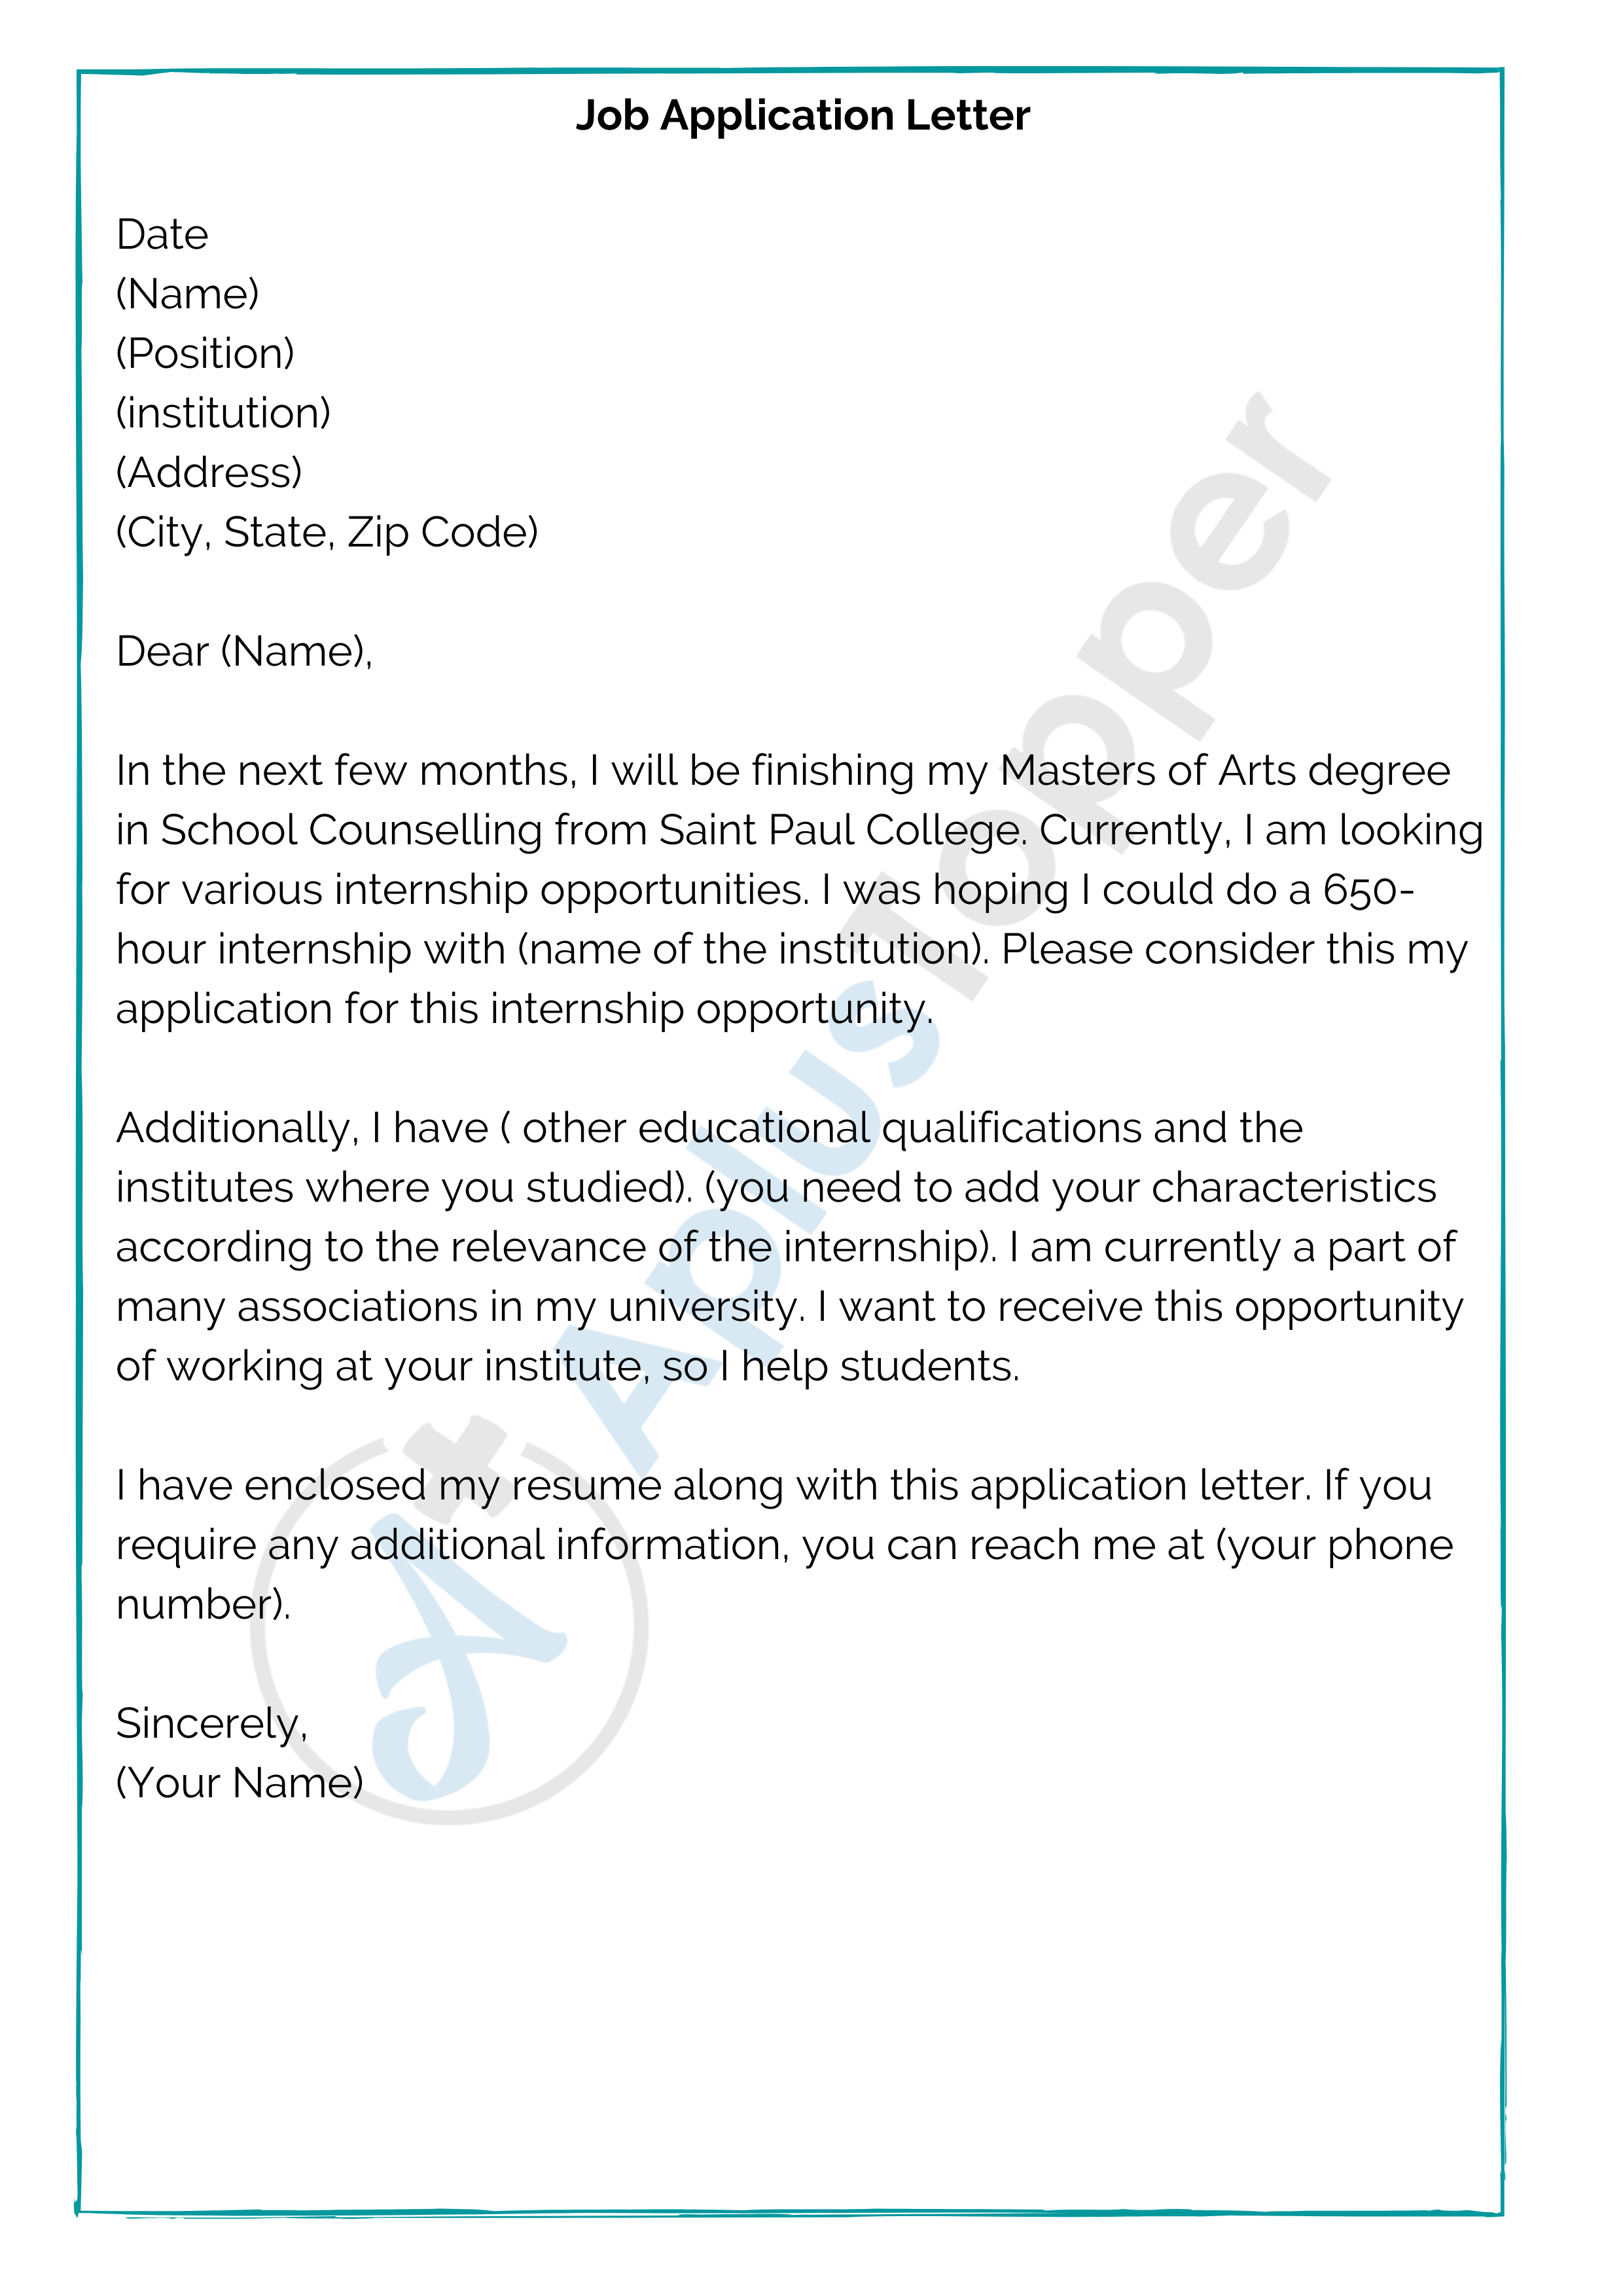 how to make an application letter for a job